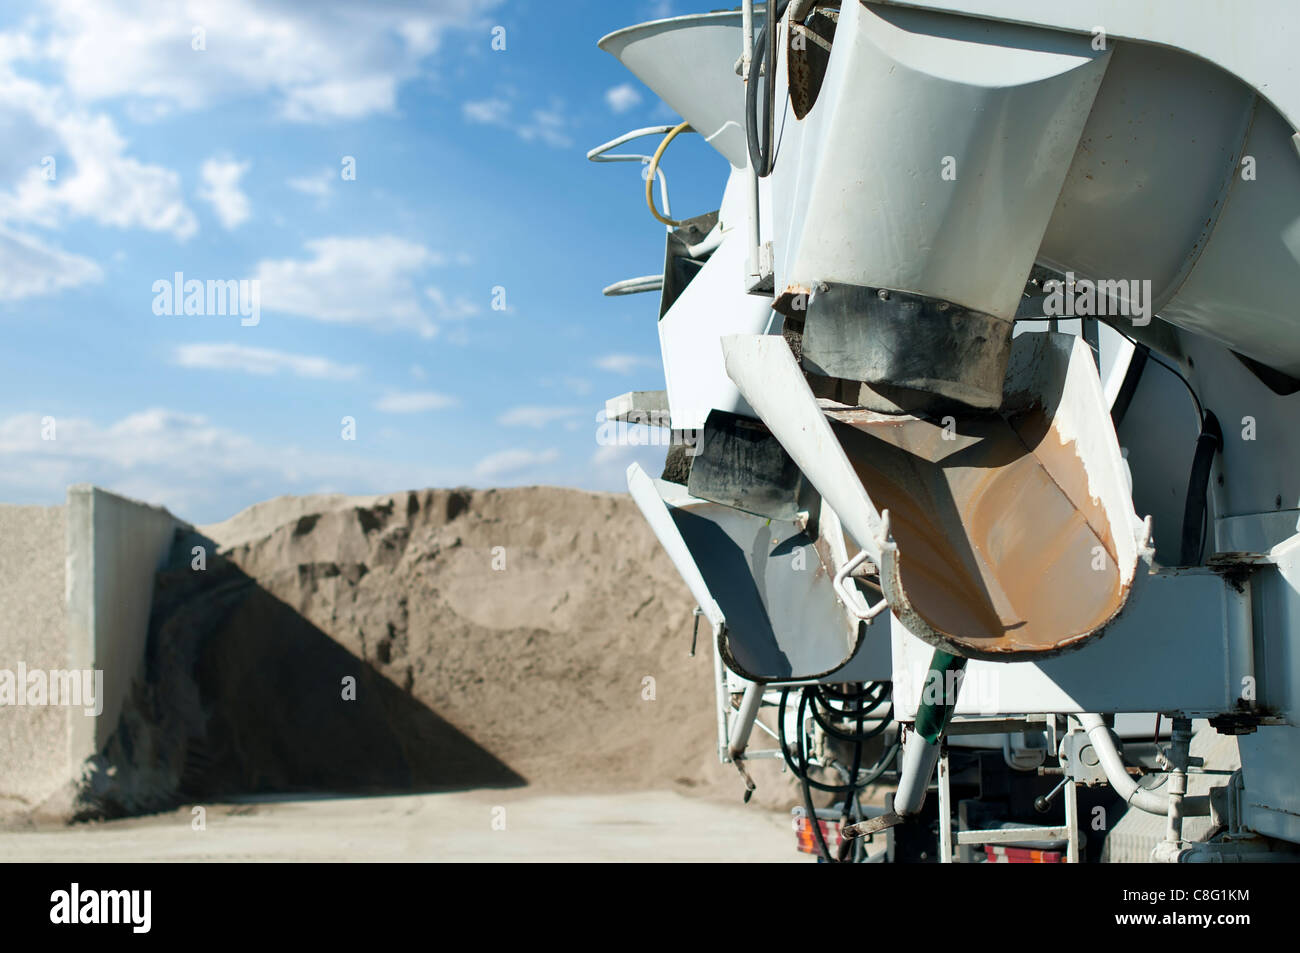 Cement trucks and sand Stock Photo